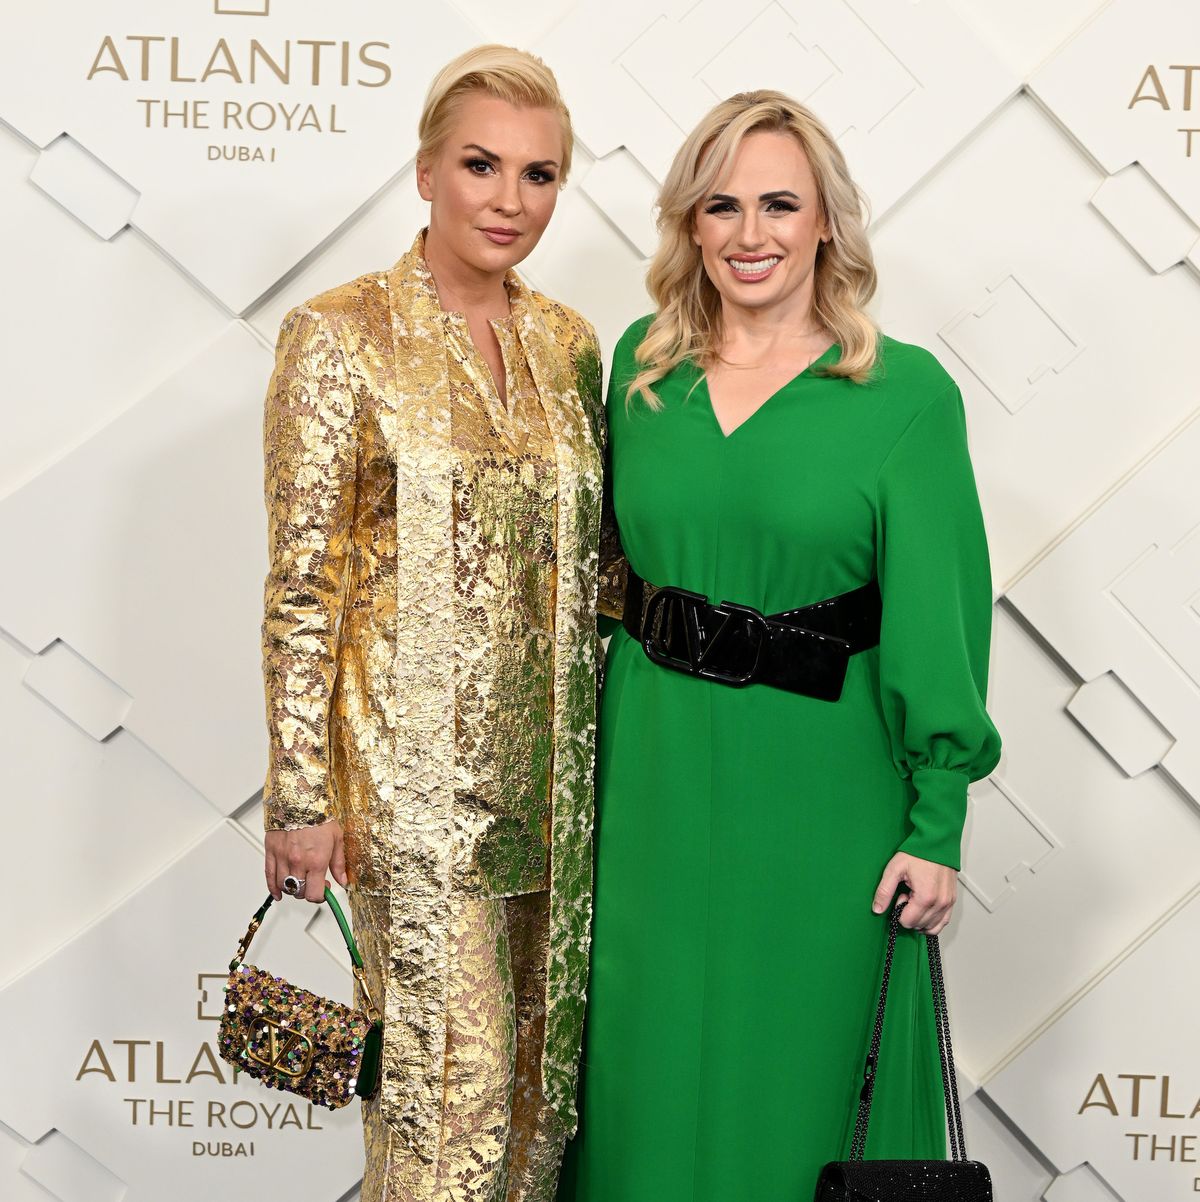 dubai, united arab emirates january 21 ramona agruma and rebel wilson attend the grand reveal weekend for atlantis the royal, dubai's new ultra luxury hotel on january 21, 2023 in dubai, united arab emirates photo by jeff spicergetty images for atlantis the royal